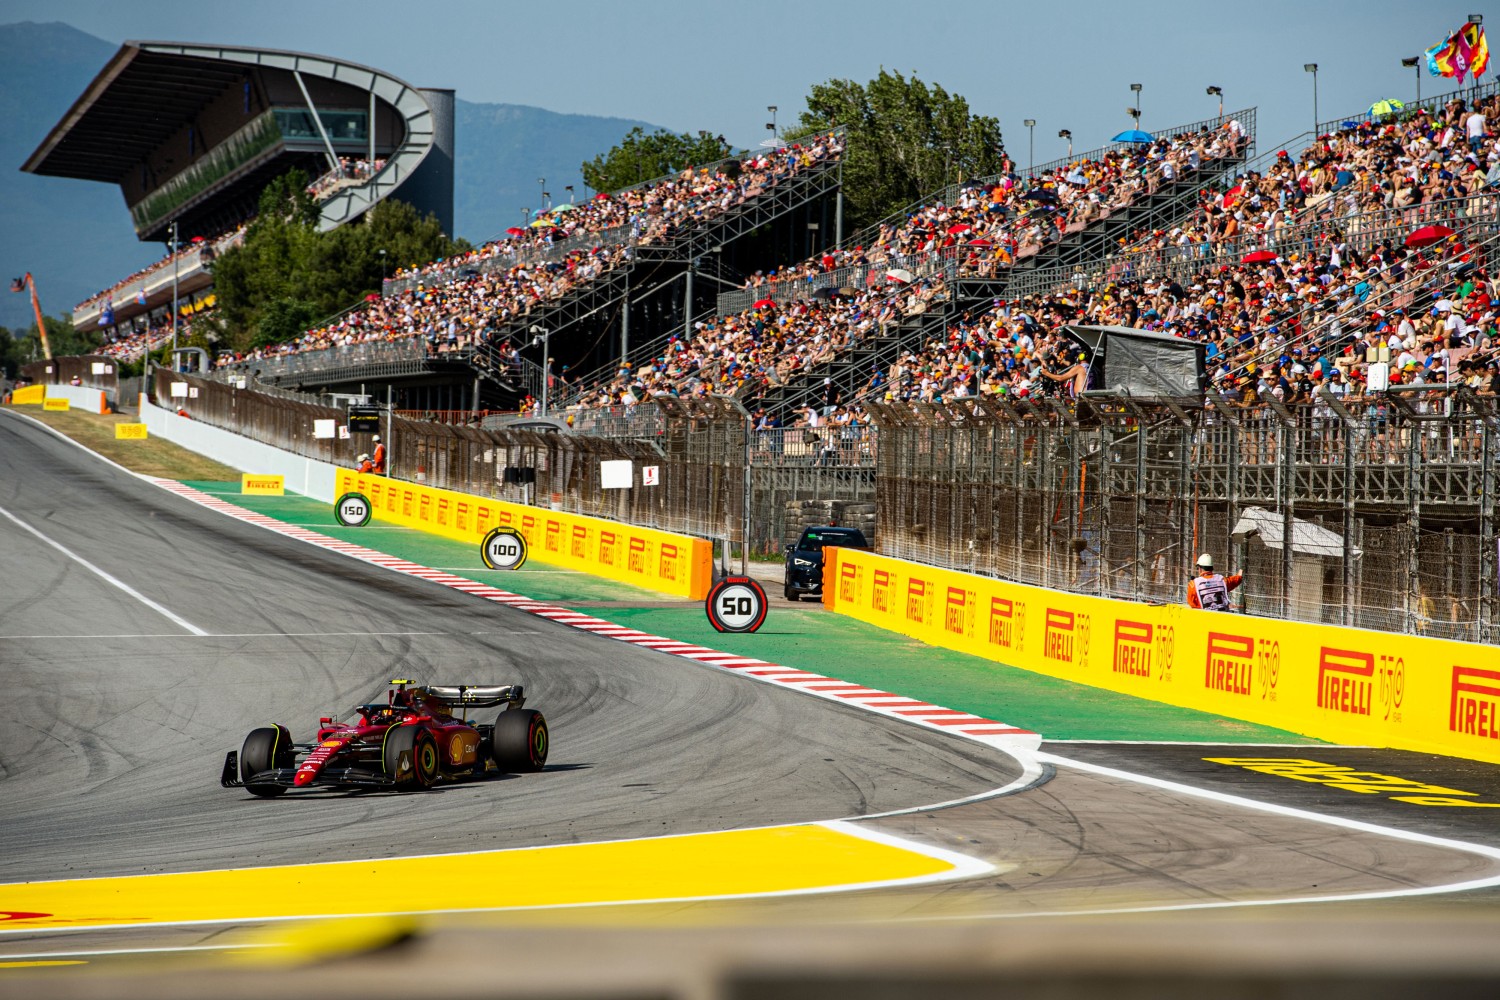 F1 soon to announce new Grand Prix in European capital city